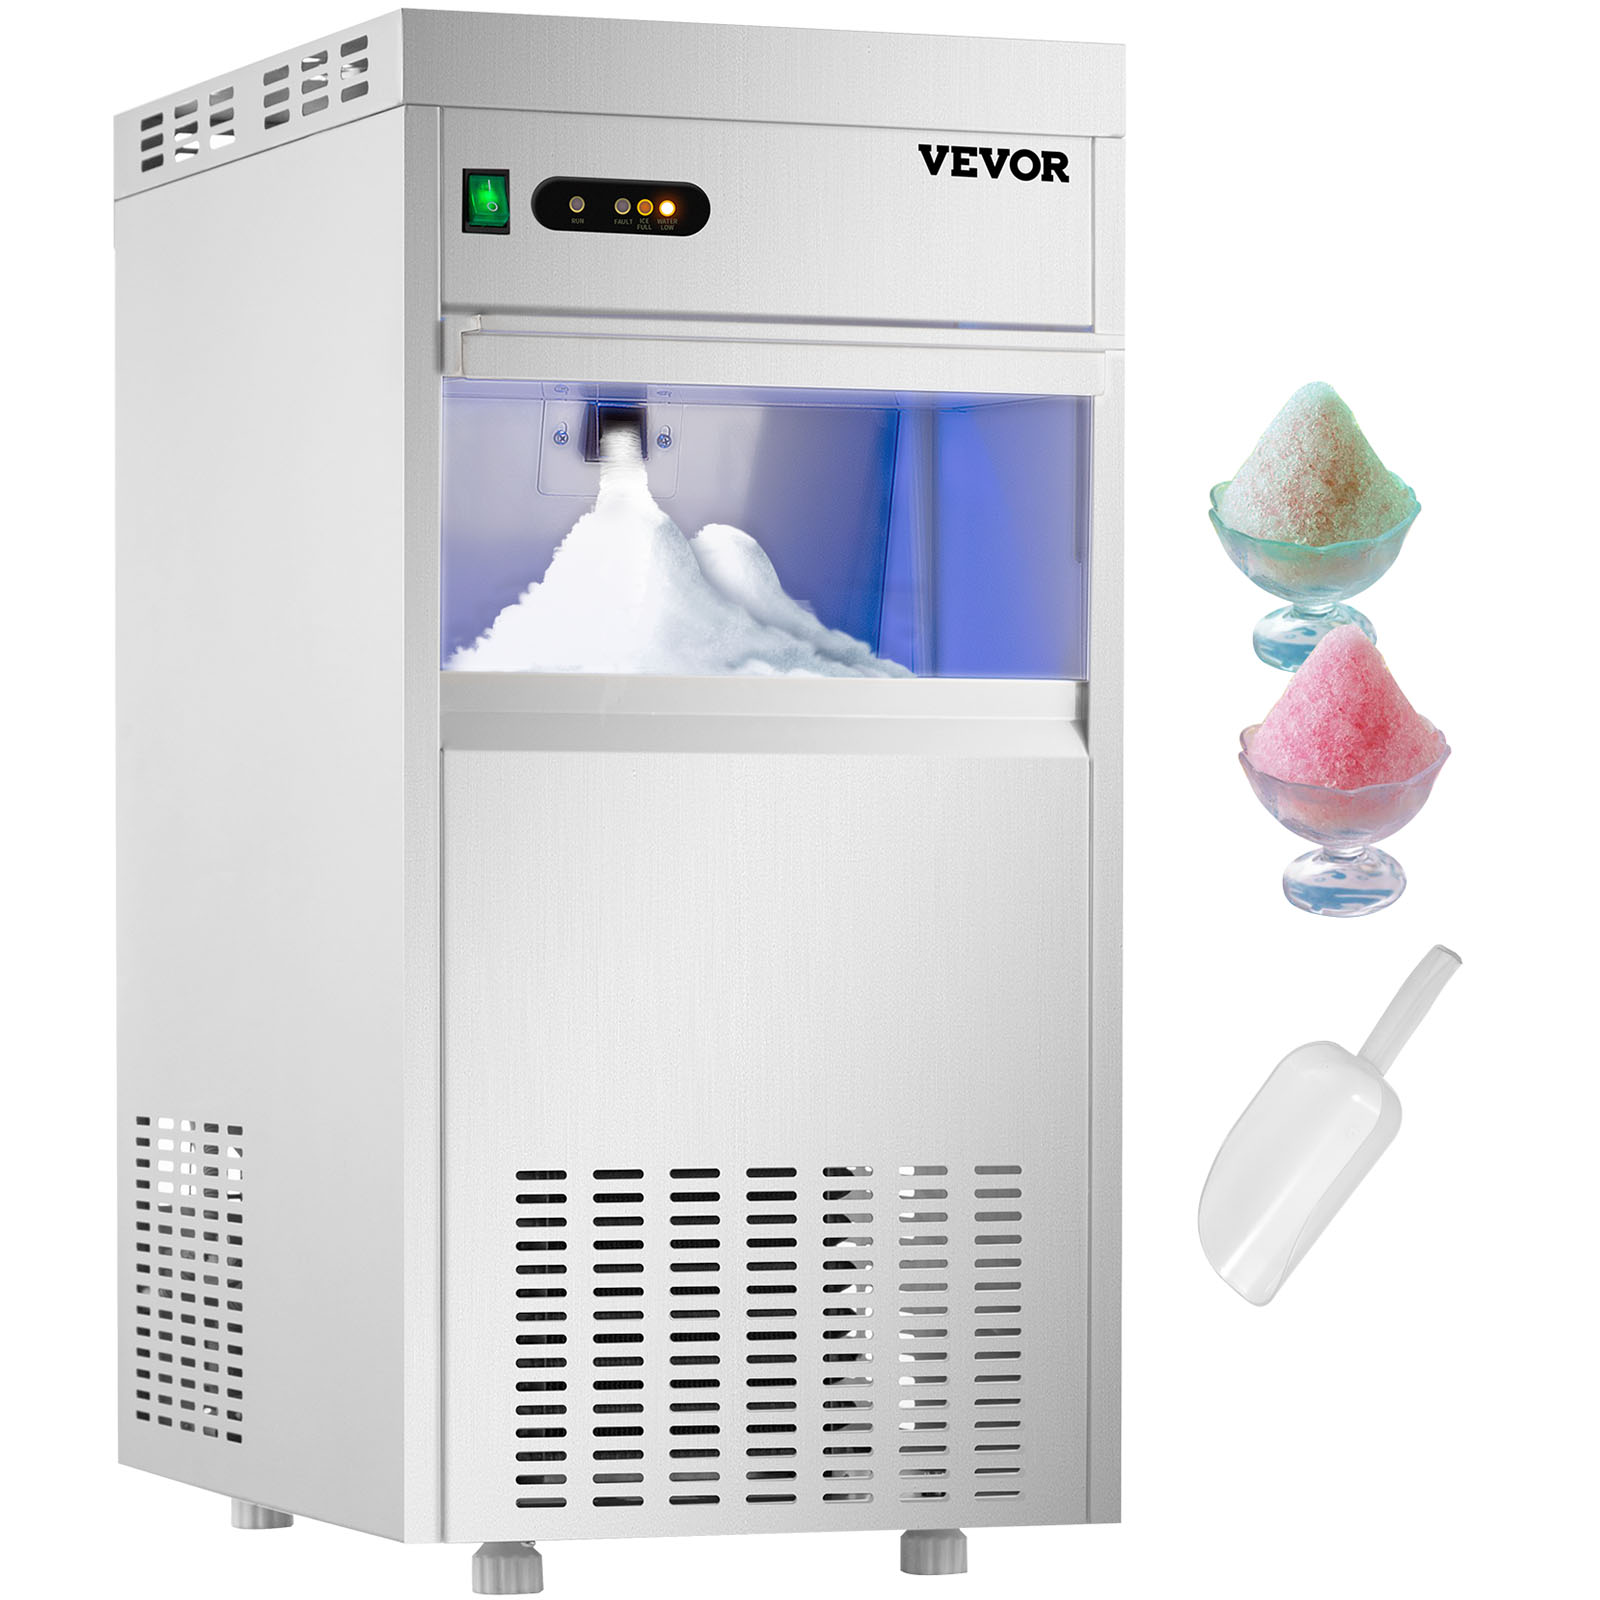 VEVOR Snow Flake Ice Maker 132lbs/60kg 132 lb 15 kg Ice Storage Counter Top Updated